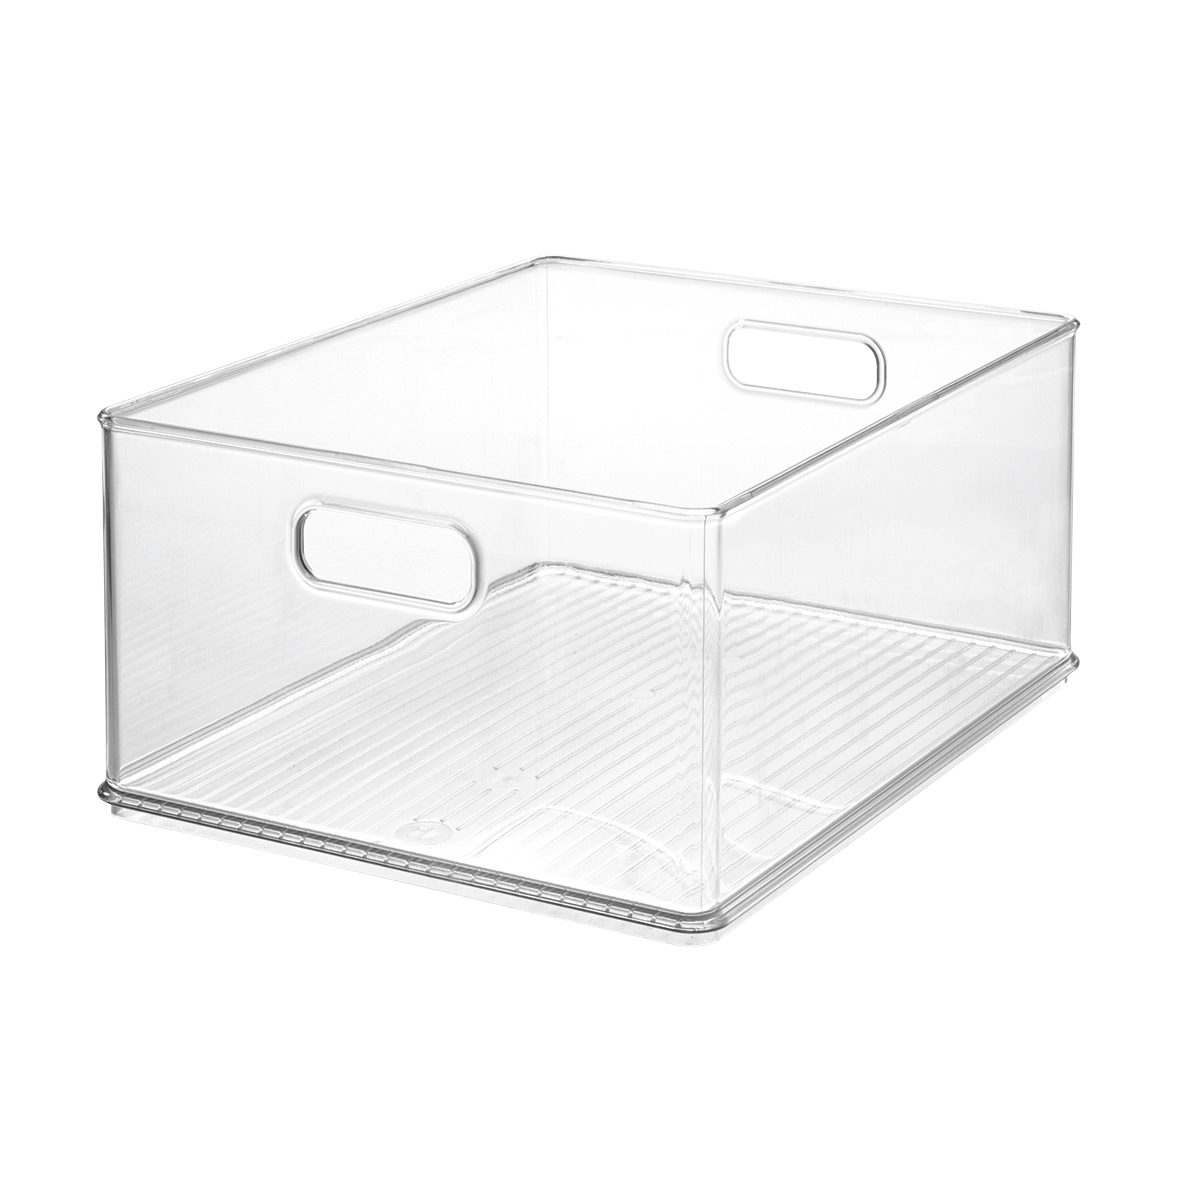 https://www.containerstore.com/catalogimages/398329/10082406-iDESIGN-Small-Stackable-Clo.jpg